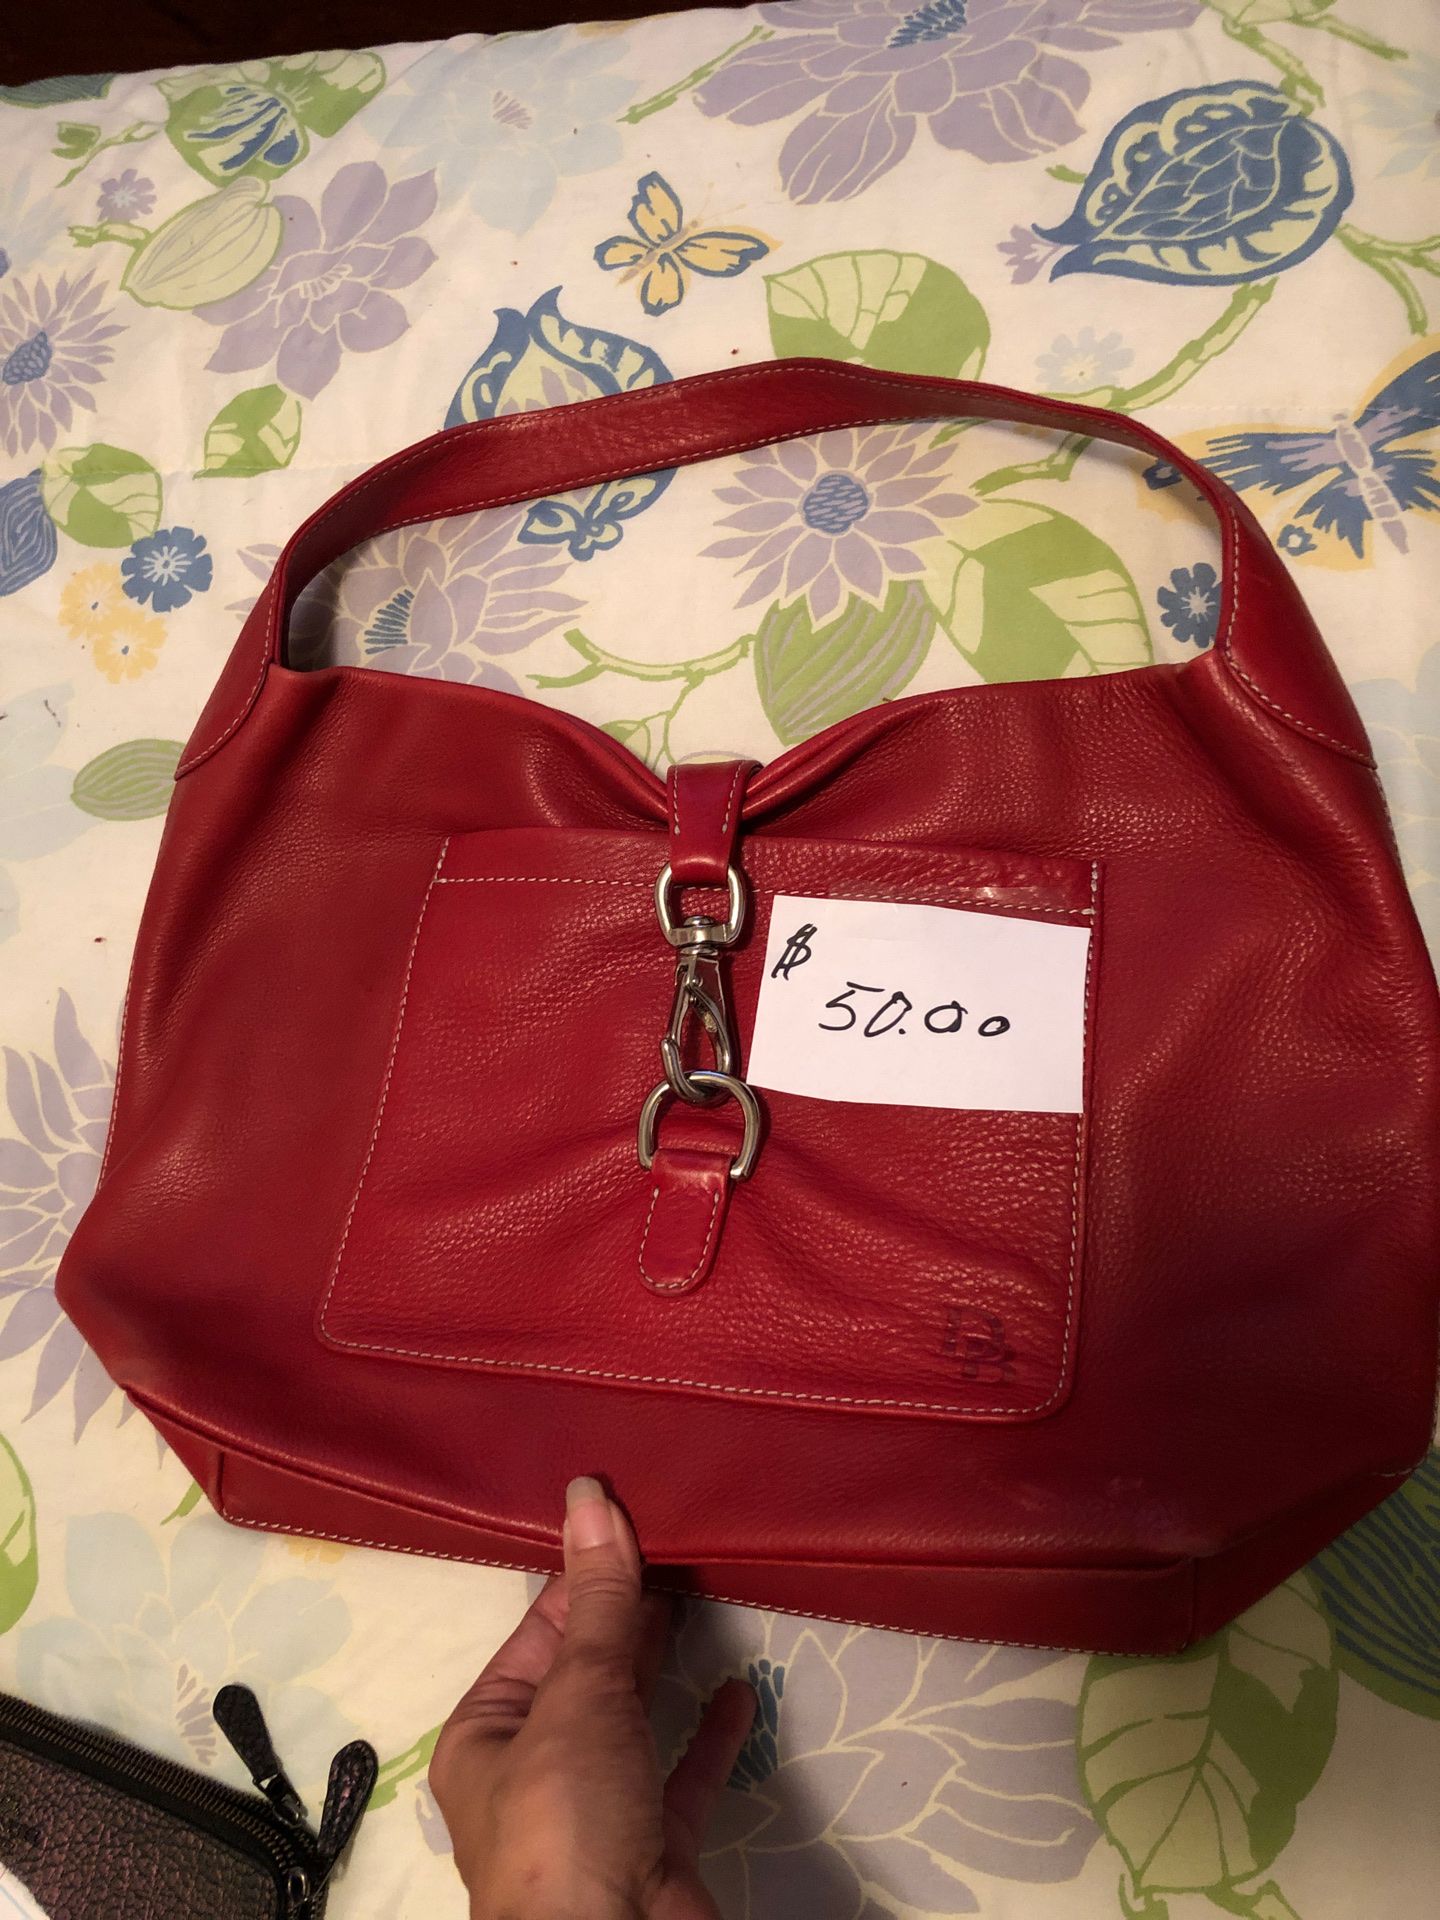 Red Dooney and Bourke purse